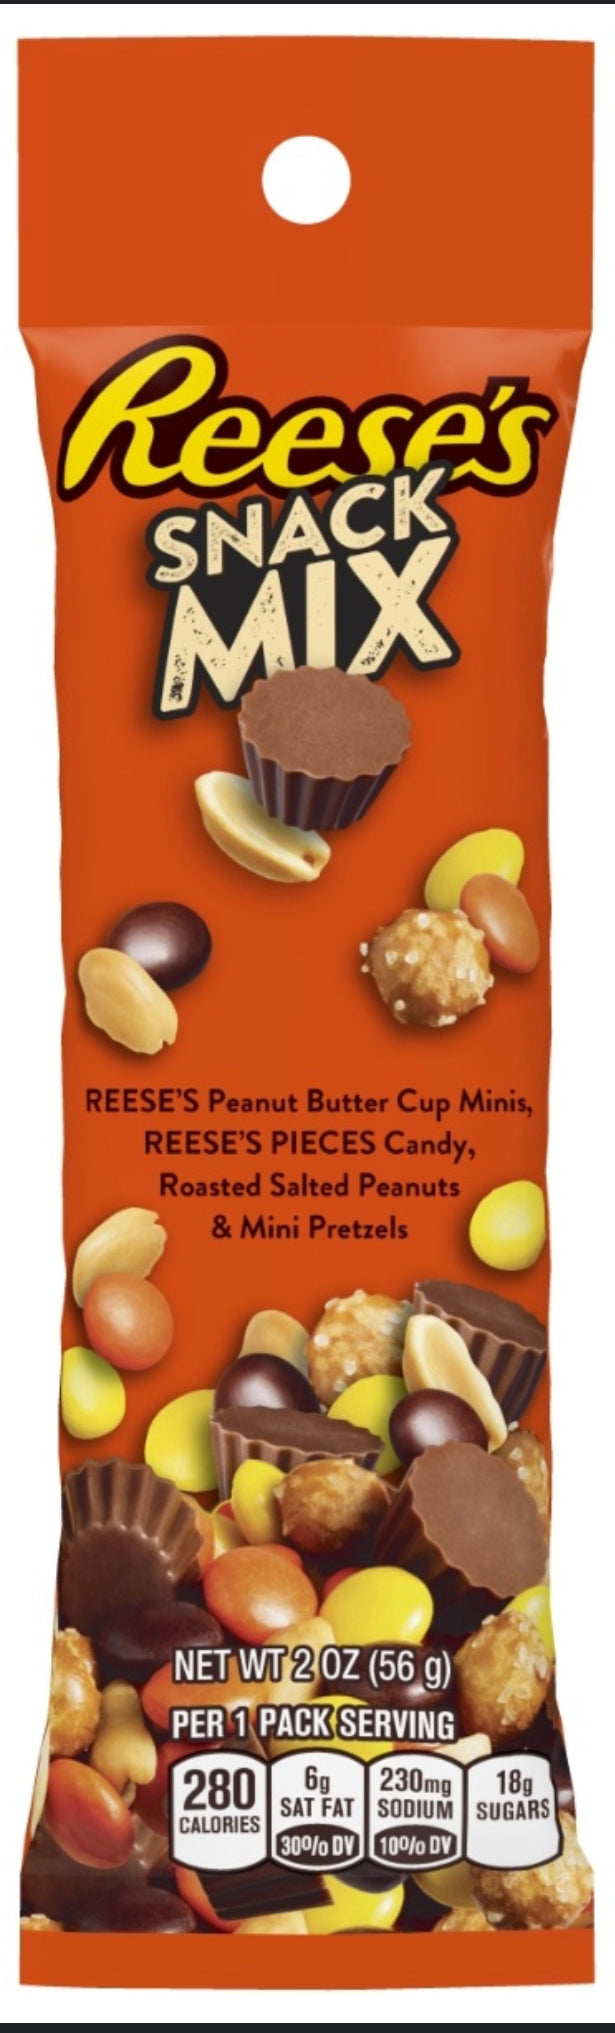 Reese’s Snack Mix